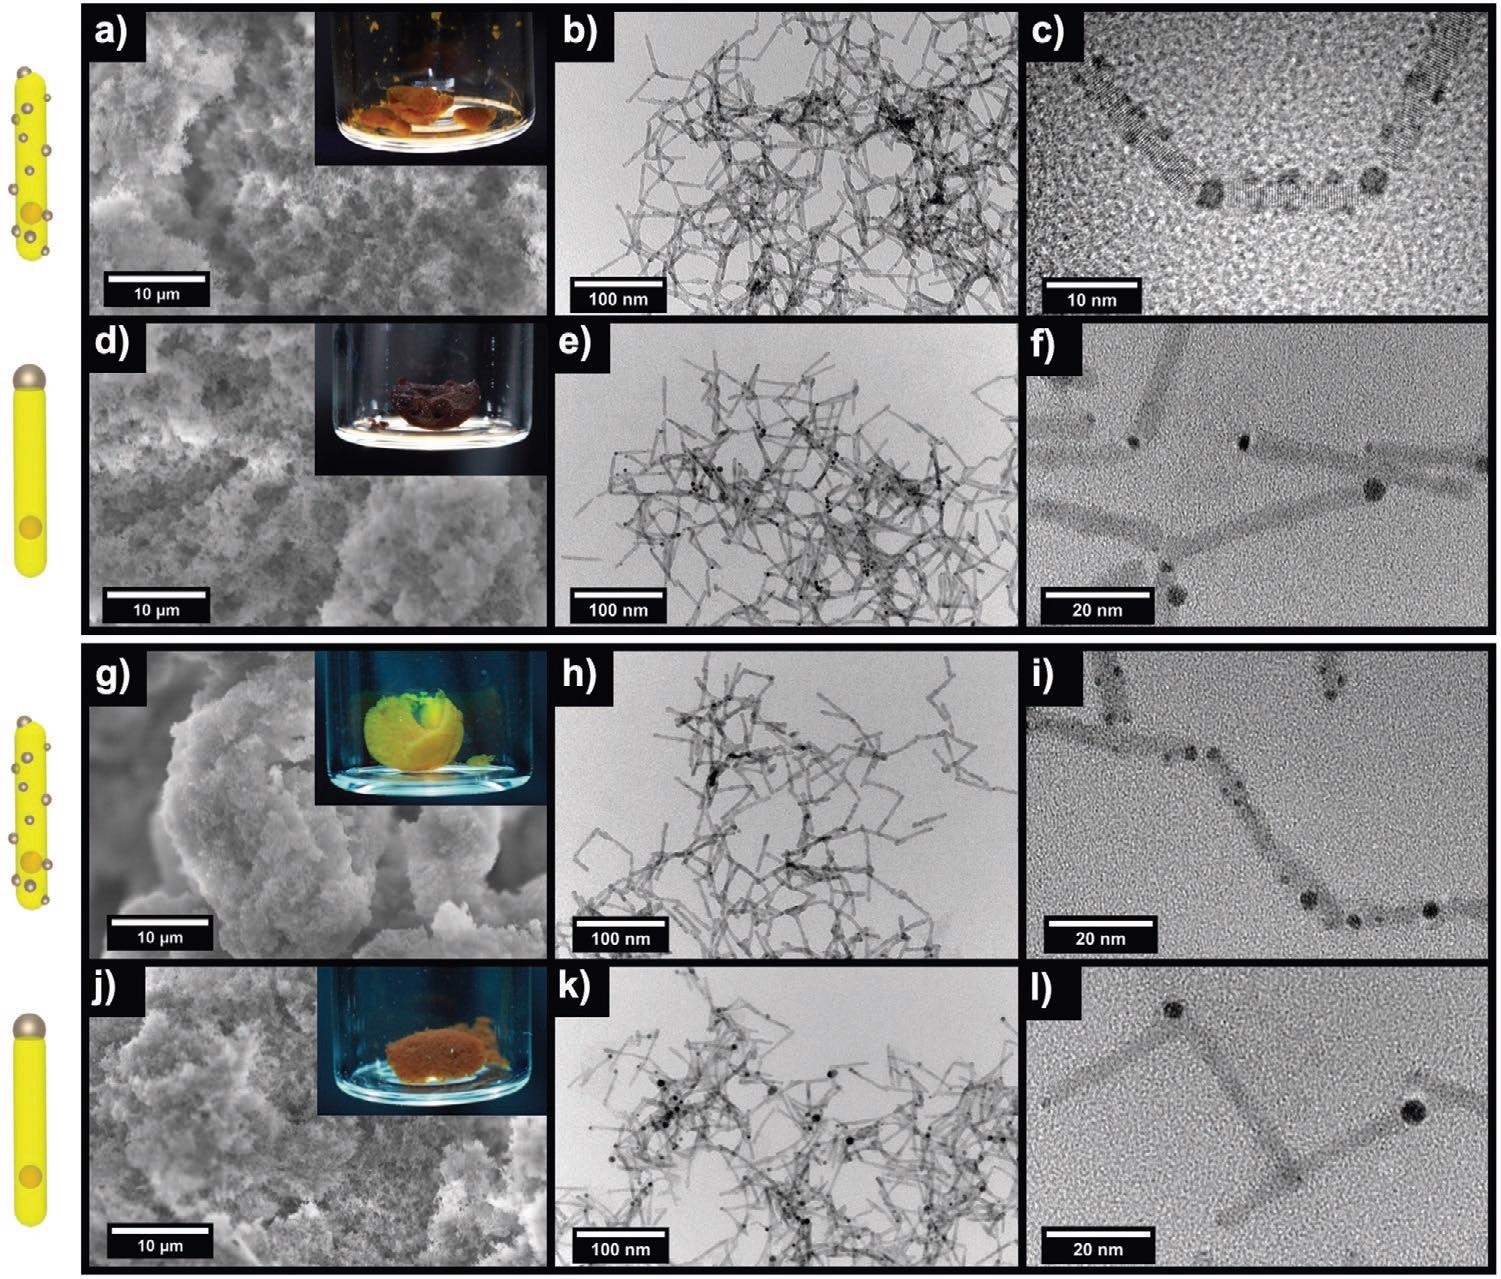 Comparative morphological overview of different hybrid aerogel networks assembled via a–f) H2O2 (upper panel) and g–l) Y3+ (lower panel). SEM images (a,d,g,j) and TEM images of random-NR aerogels assembled via H2O2 (b,c) and Y3+ (h,i) as well as tipped-NR aerogels assembled via H2O2 (e,f) and Y3+ (k,l). Insets of the SEM images show the photographs of the macroscopic aerogel monoliths.